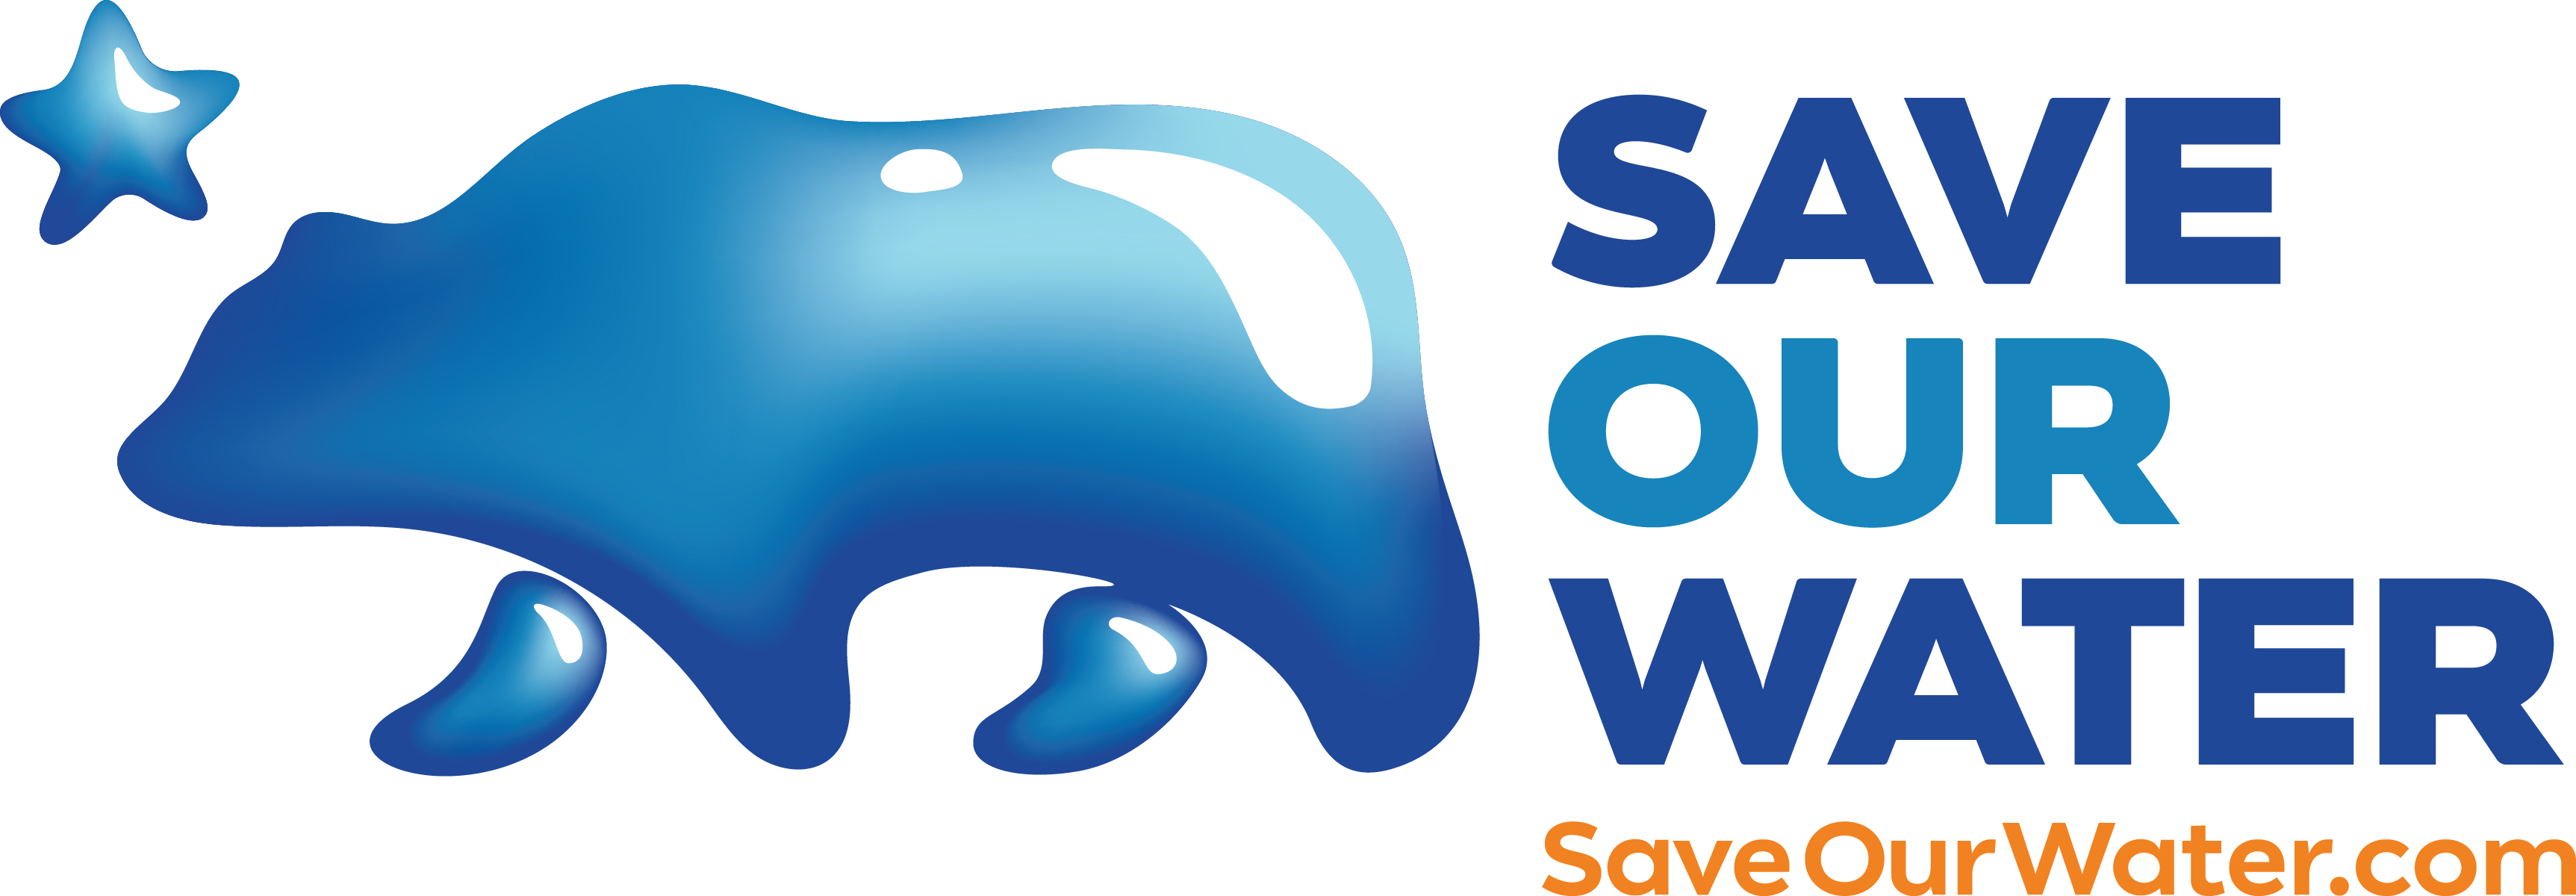 Save Our Water campaign